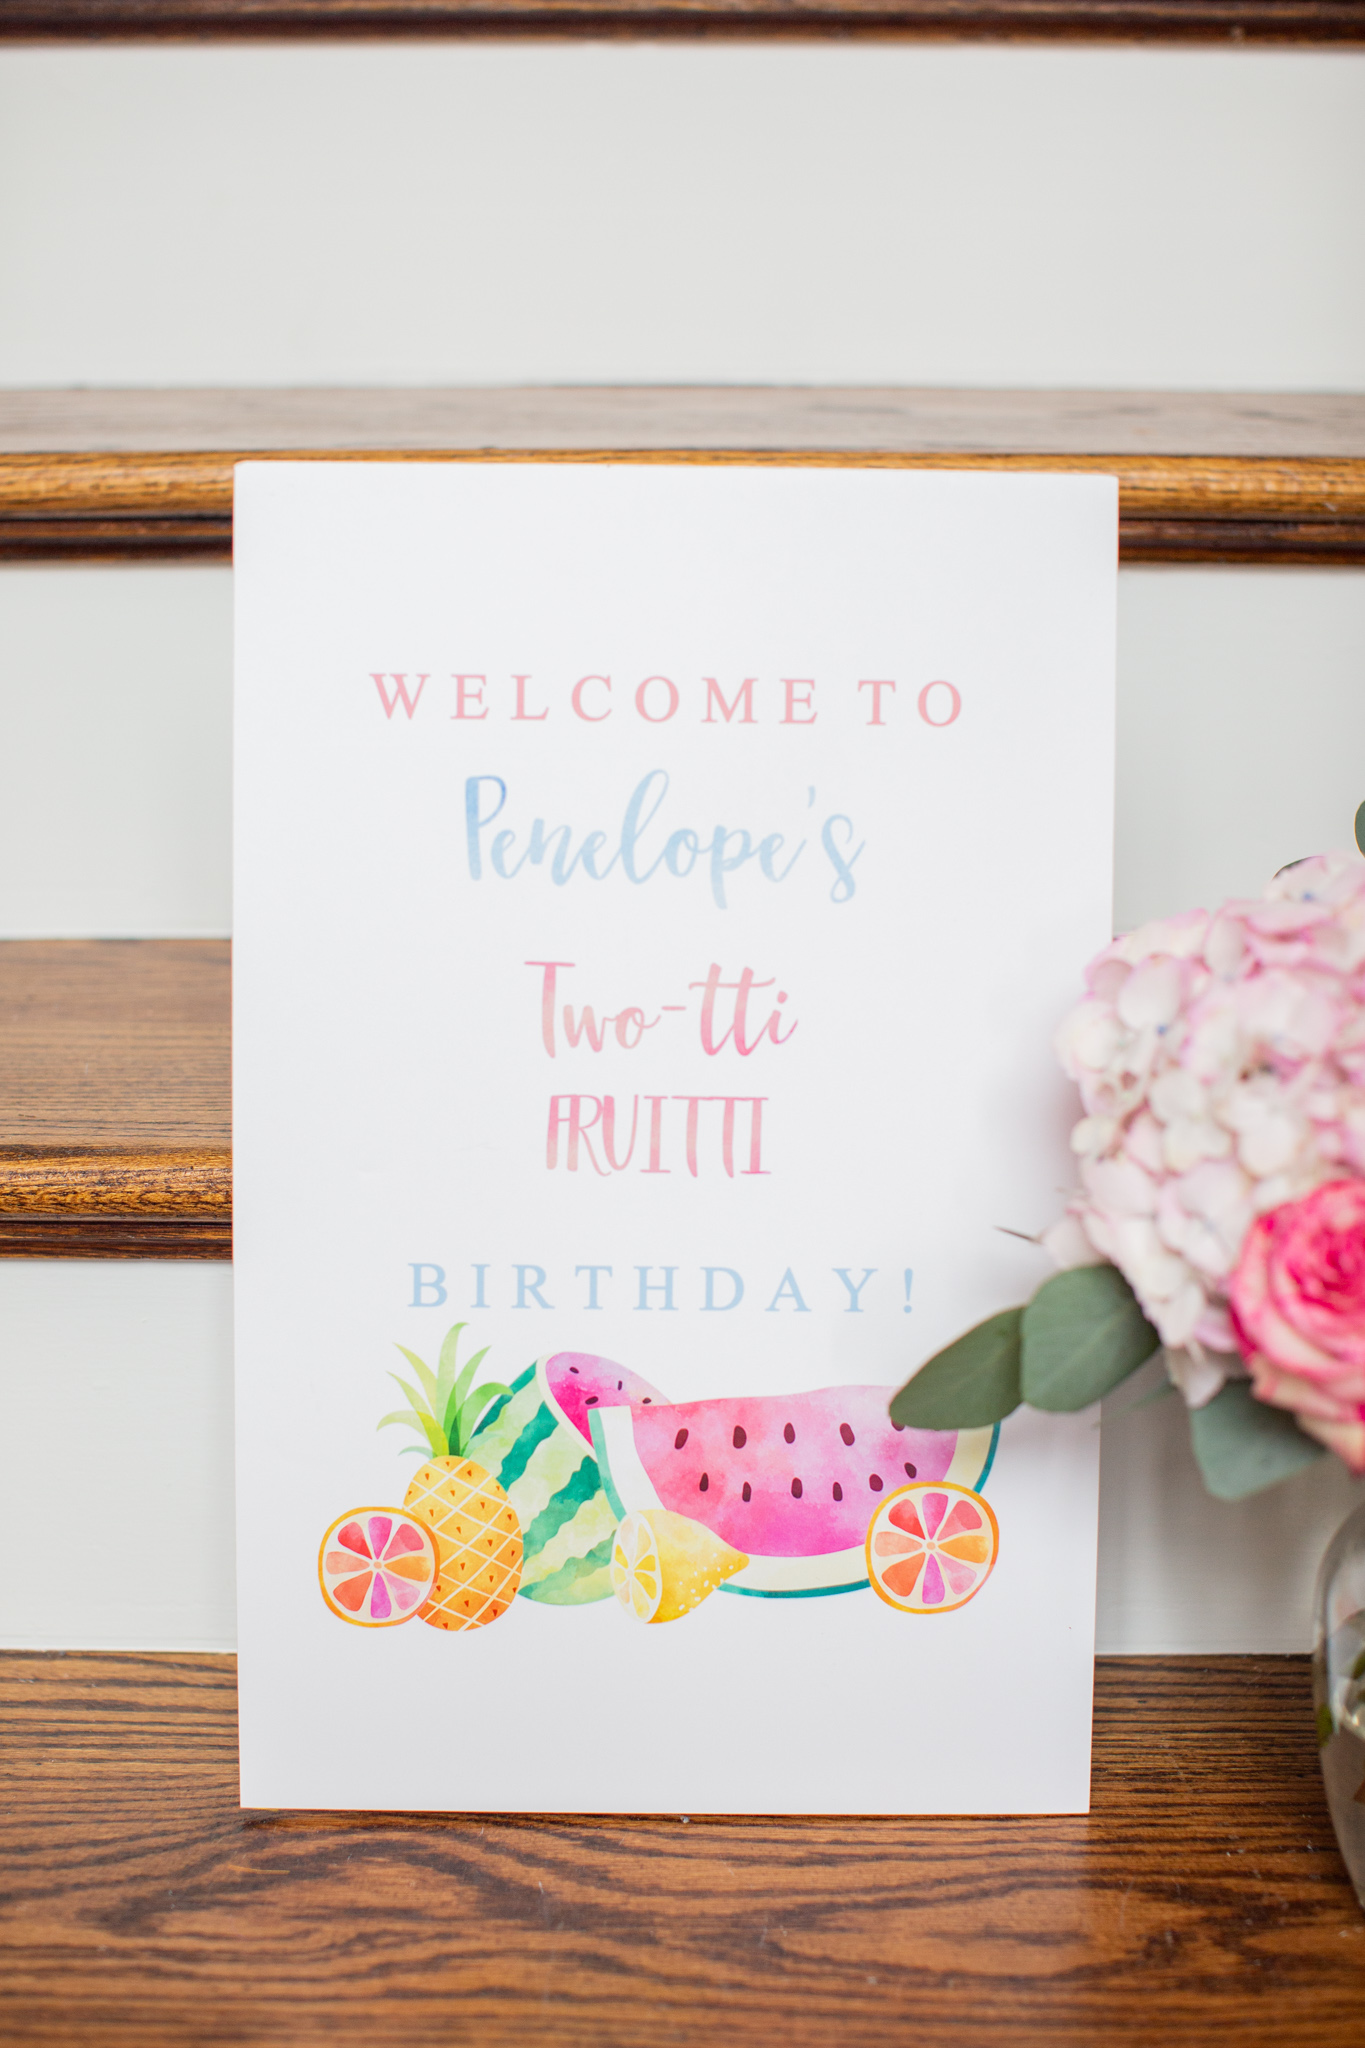 2nd Birthday Party Ideas by popular Ohio lifestyle blog, Coffee Beans and Bobby Pins: image of a watercolor painted sign that says 'Welcome to Penelope's Two-tti Fruitti birthday!' and has watercolor painted pineapple, watermelon and oranges at the bottom. 